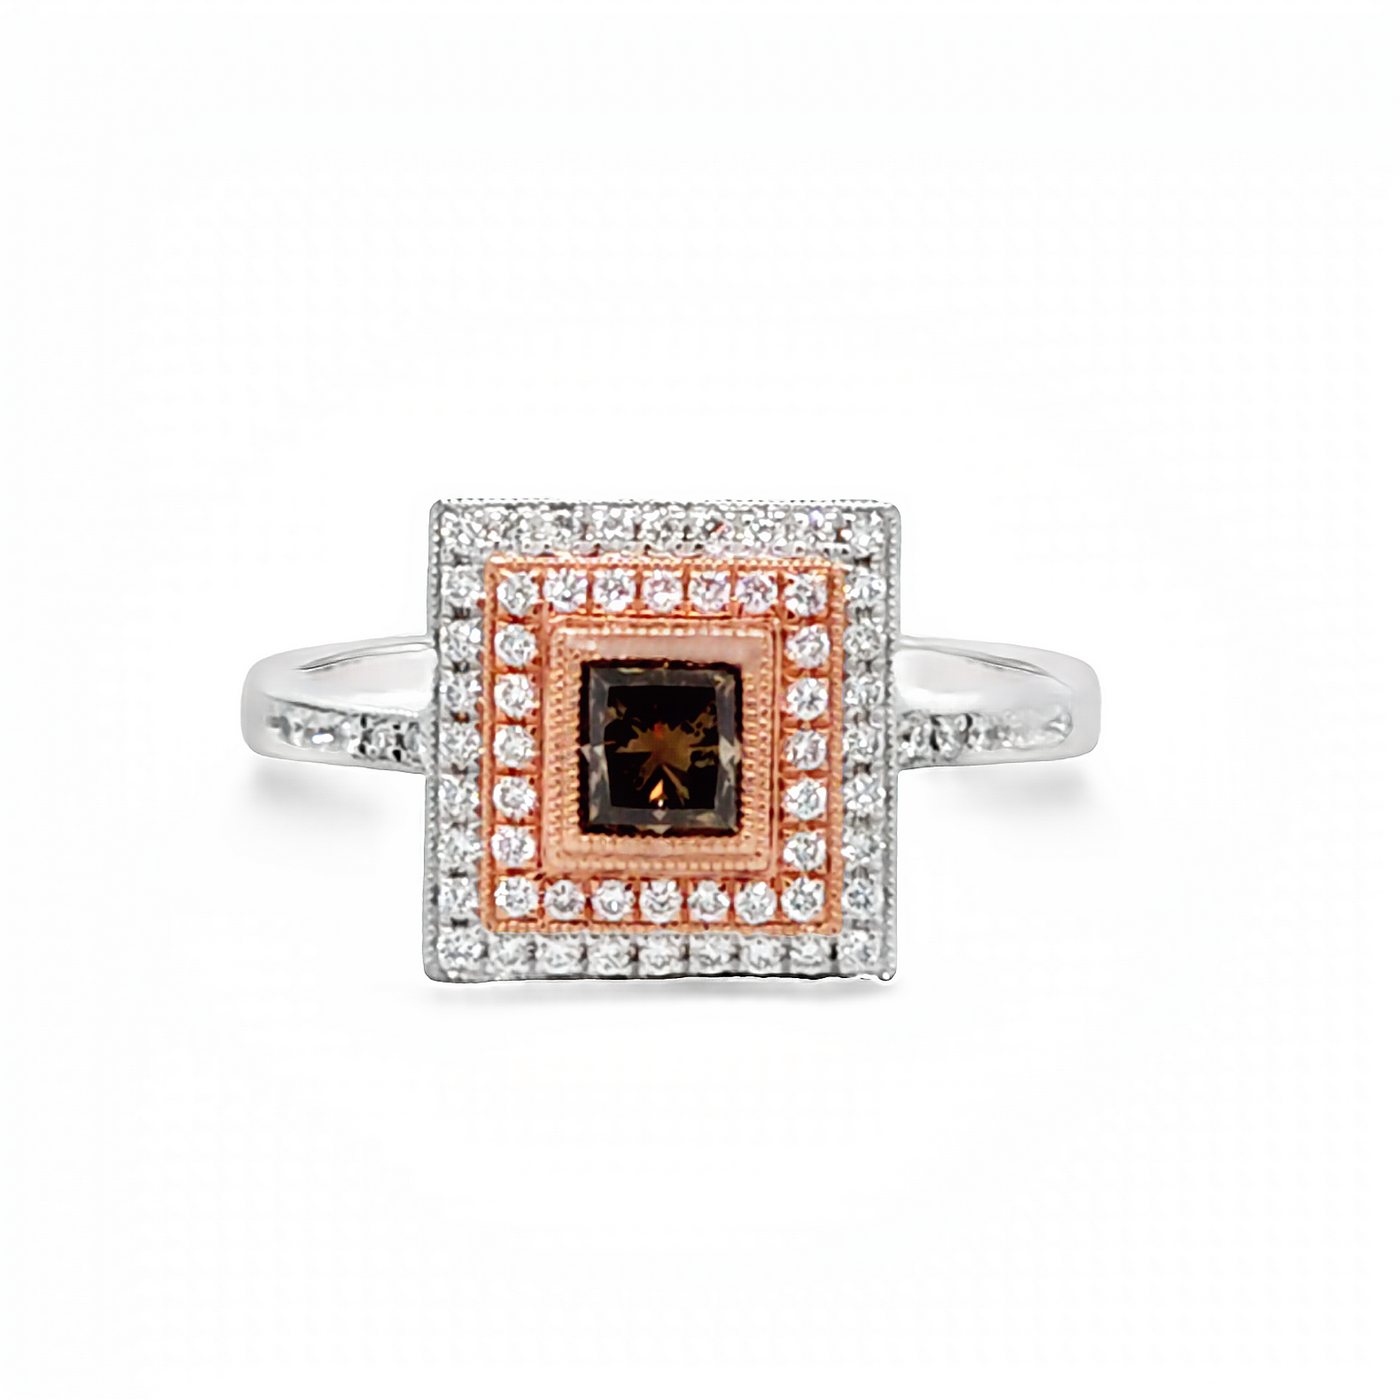 14k White and Rose Gold Princess Cut Brown and White Diamond Halo Ring (0.58ct.)